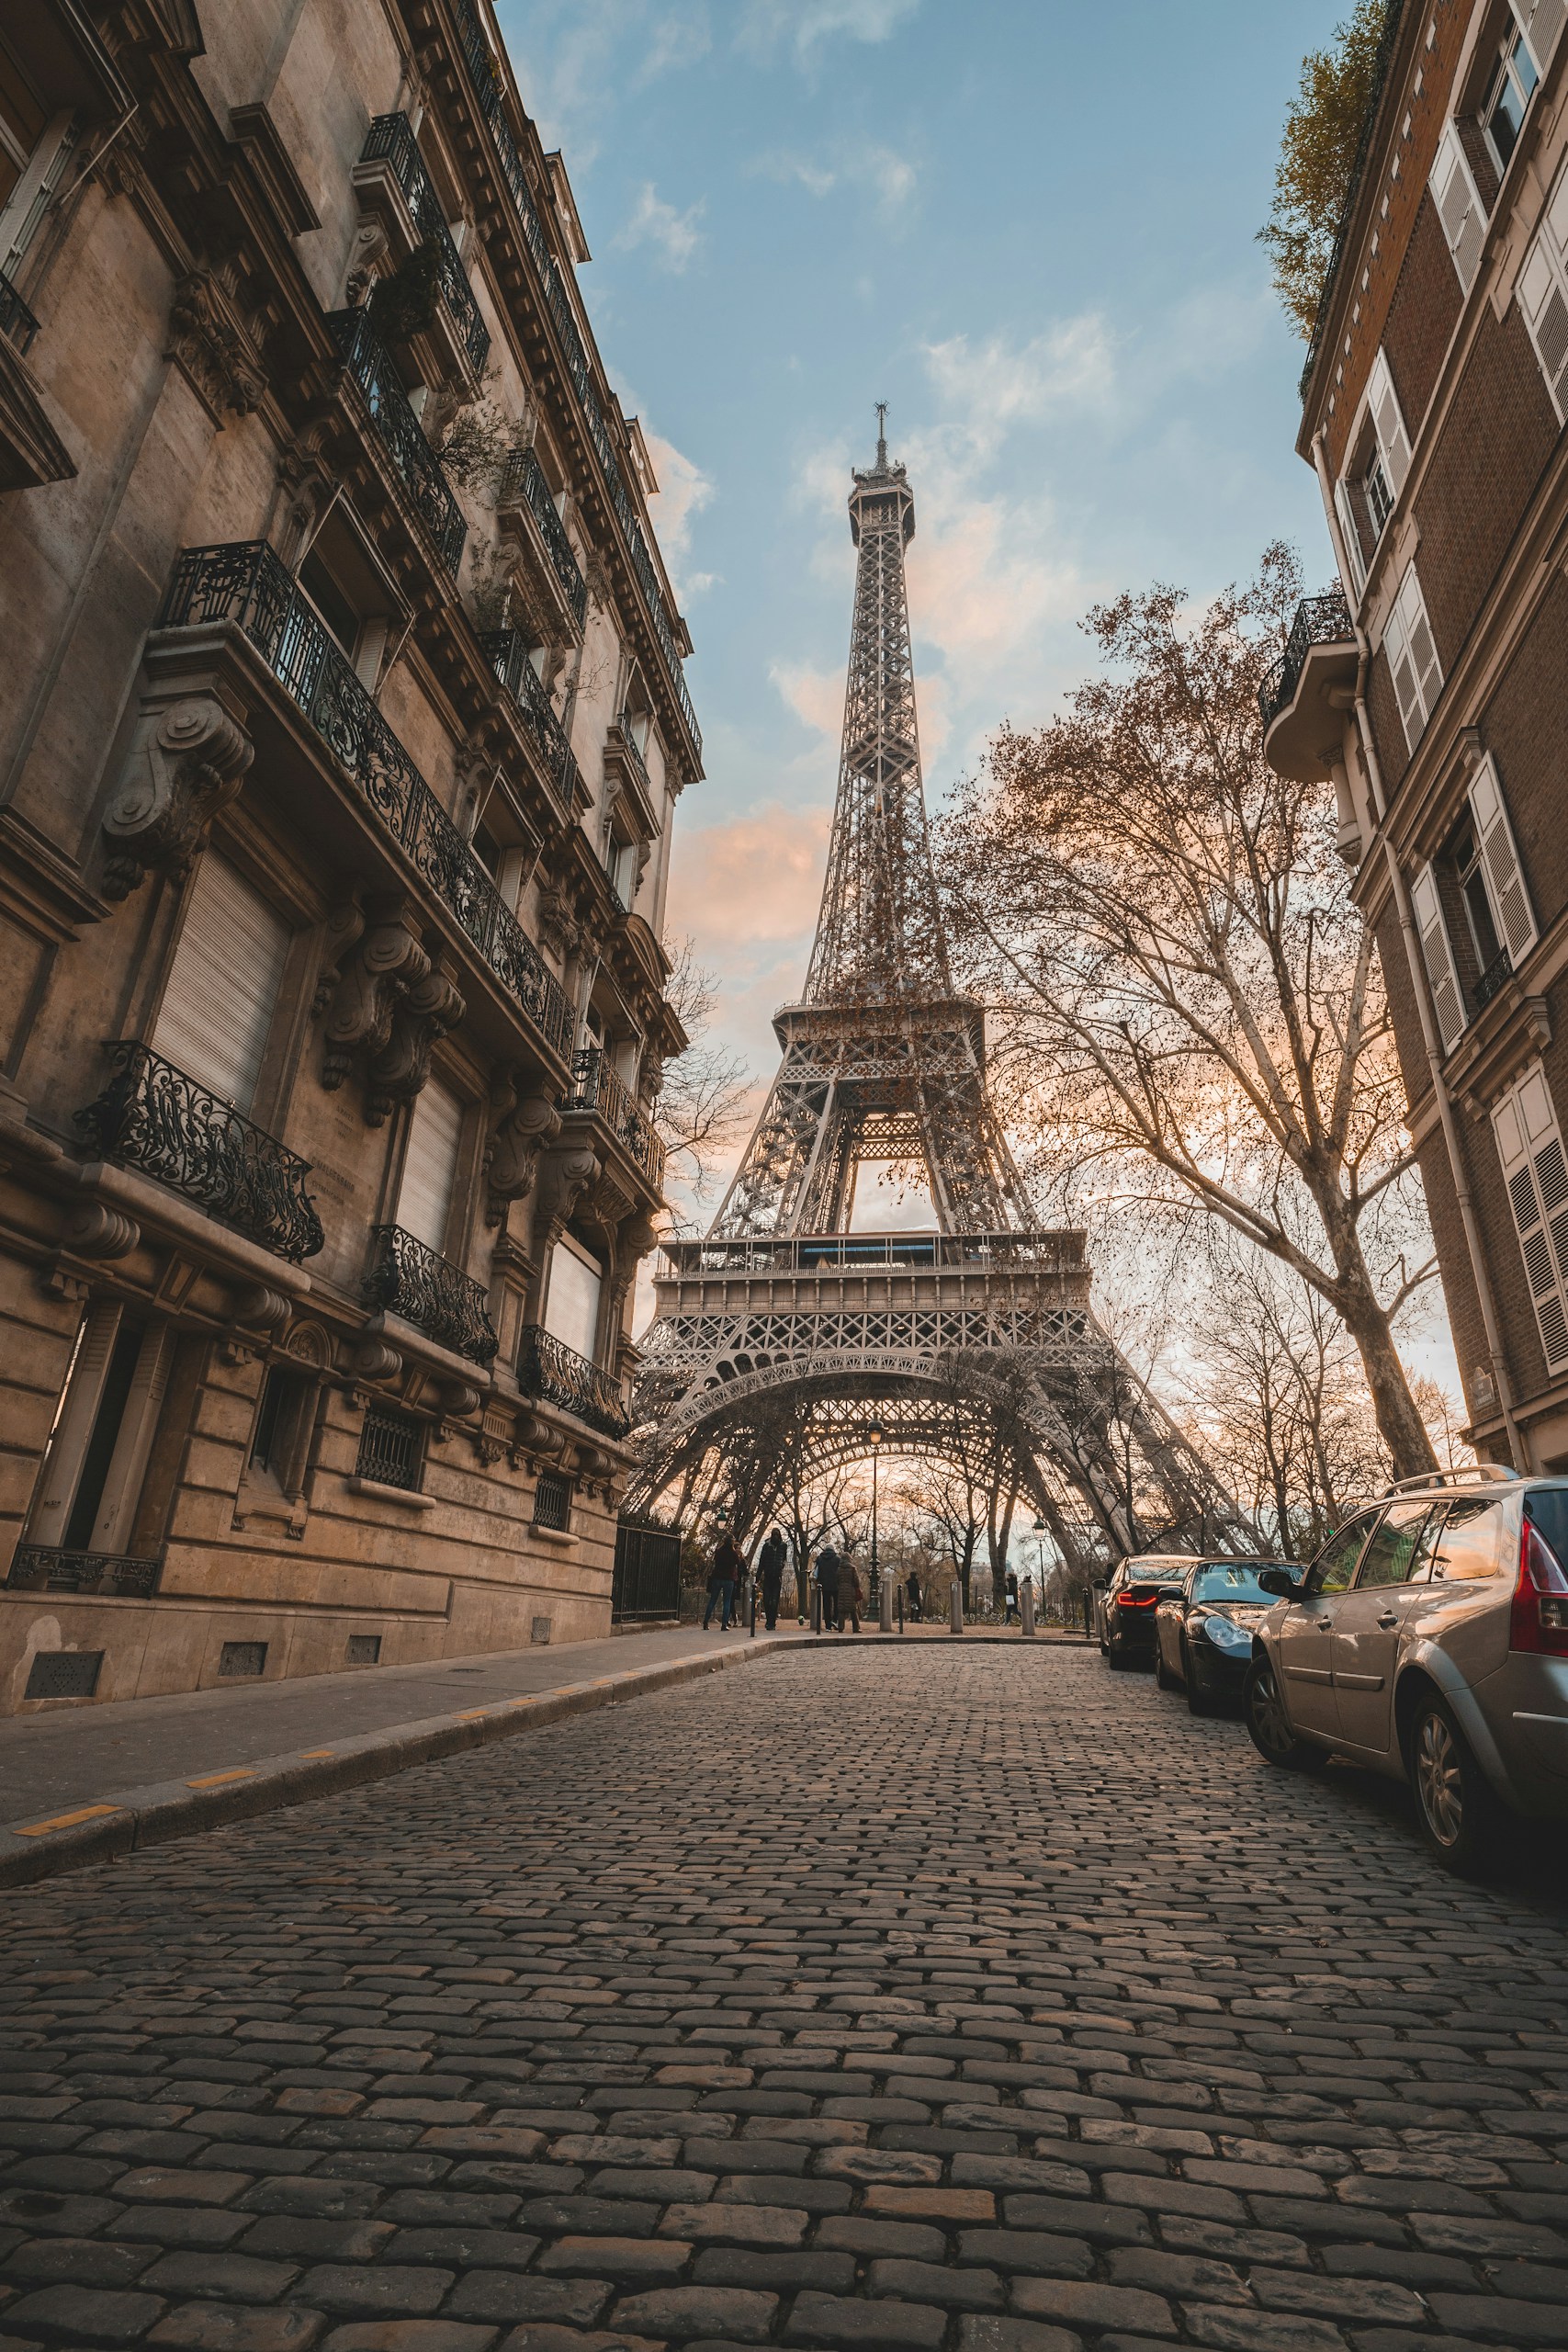 Creating a wealth of experience through travel: #fauxFrance